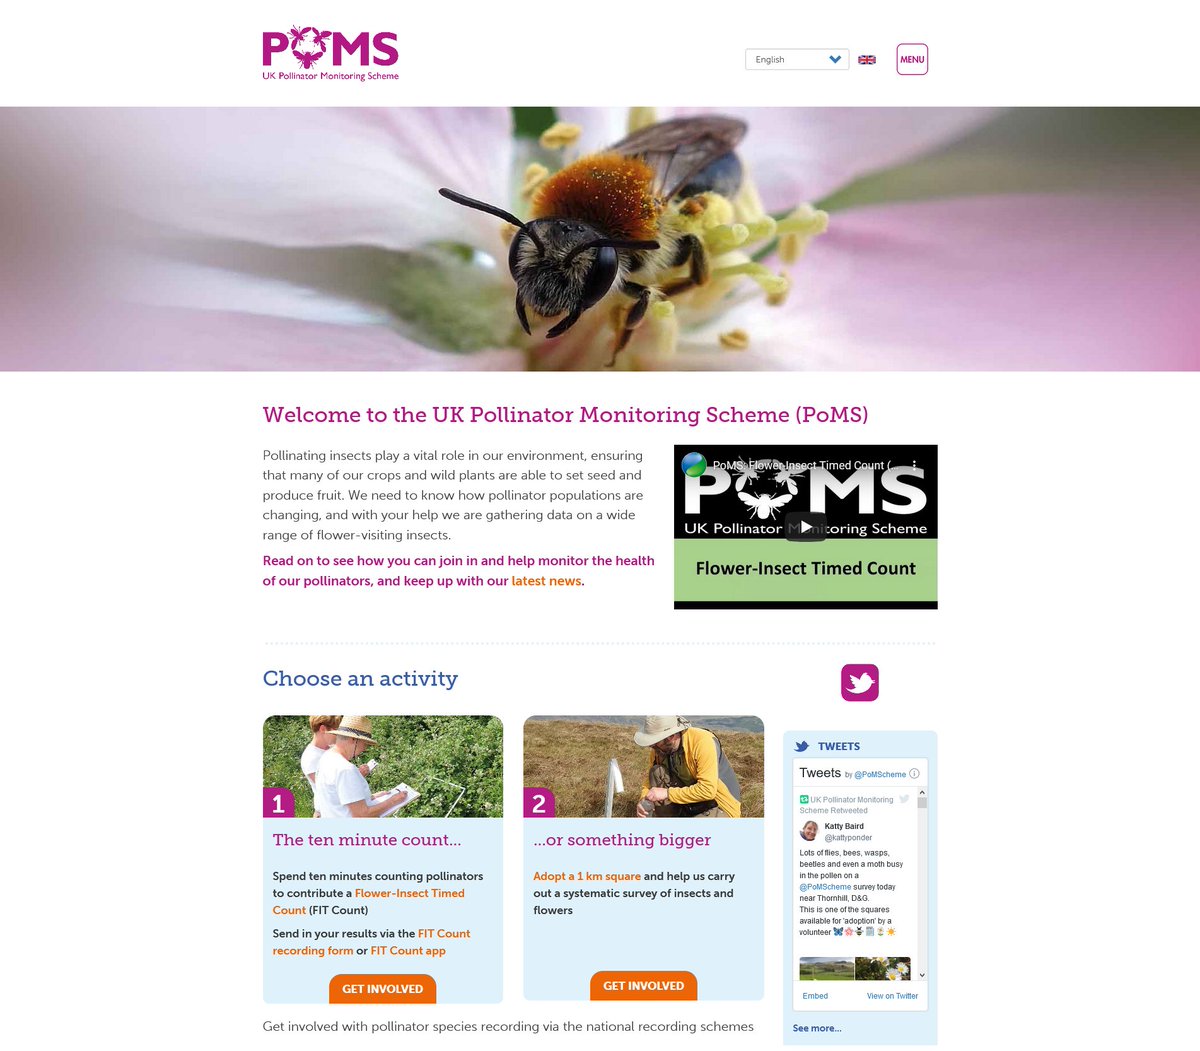 We are delighted to announce the launch of our new website ukpoms.org.uk on #WorldBeeDay (other pollinators are also available!). See also the @UK_CEH blog post: ceh.ac.uk/news-and-media…